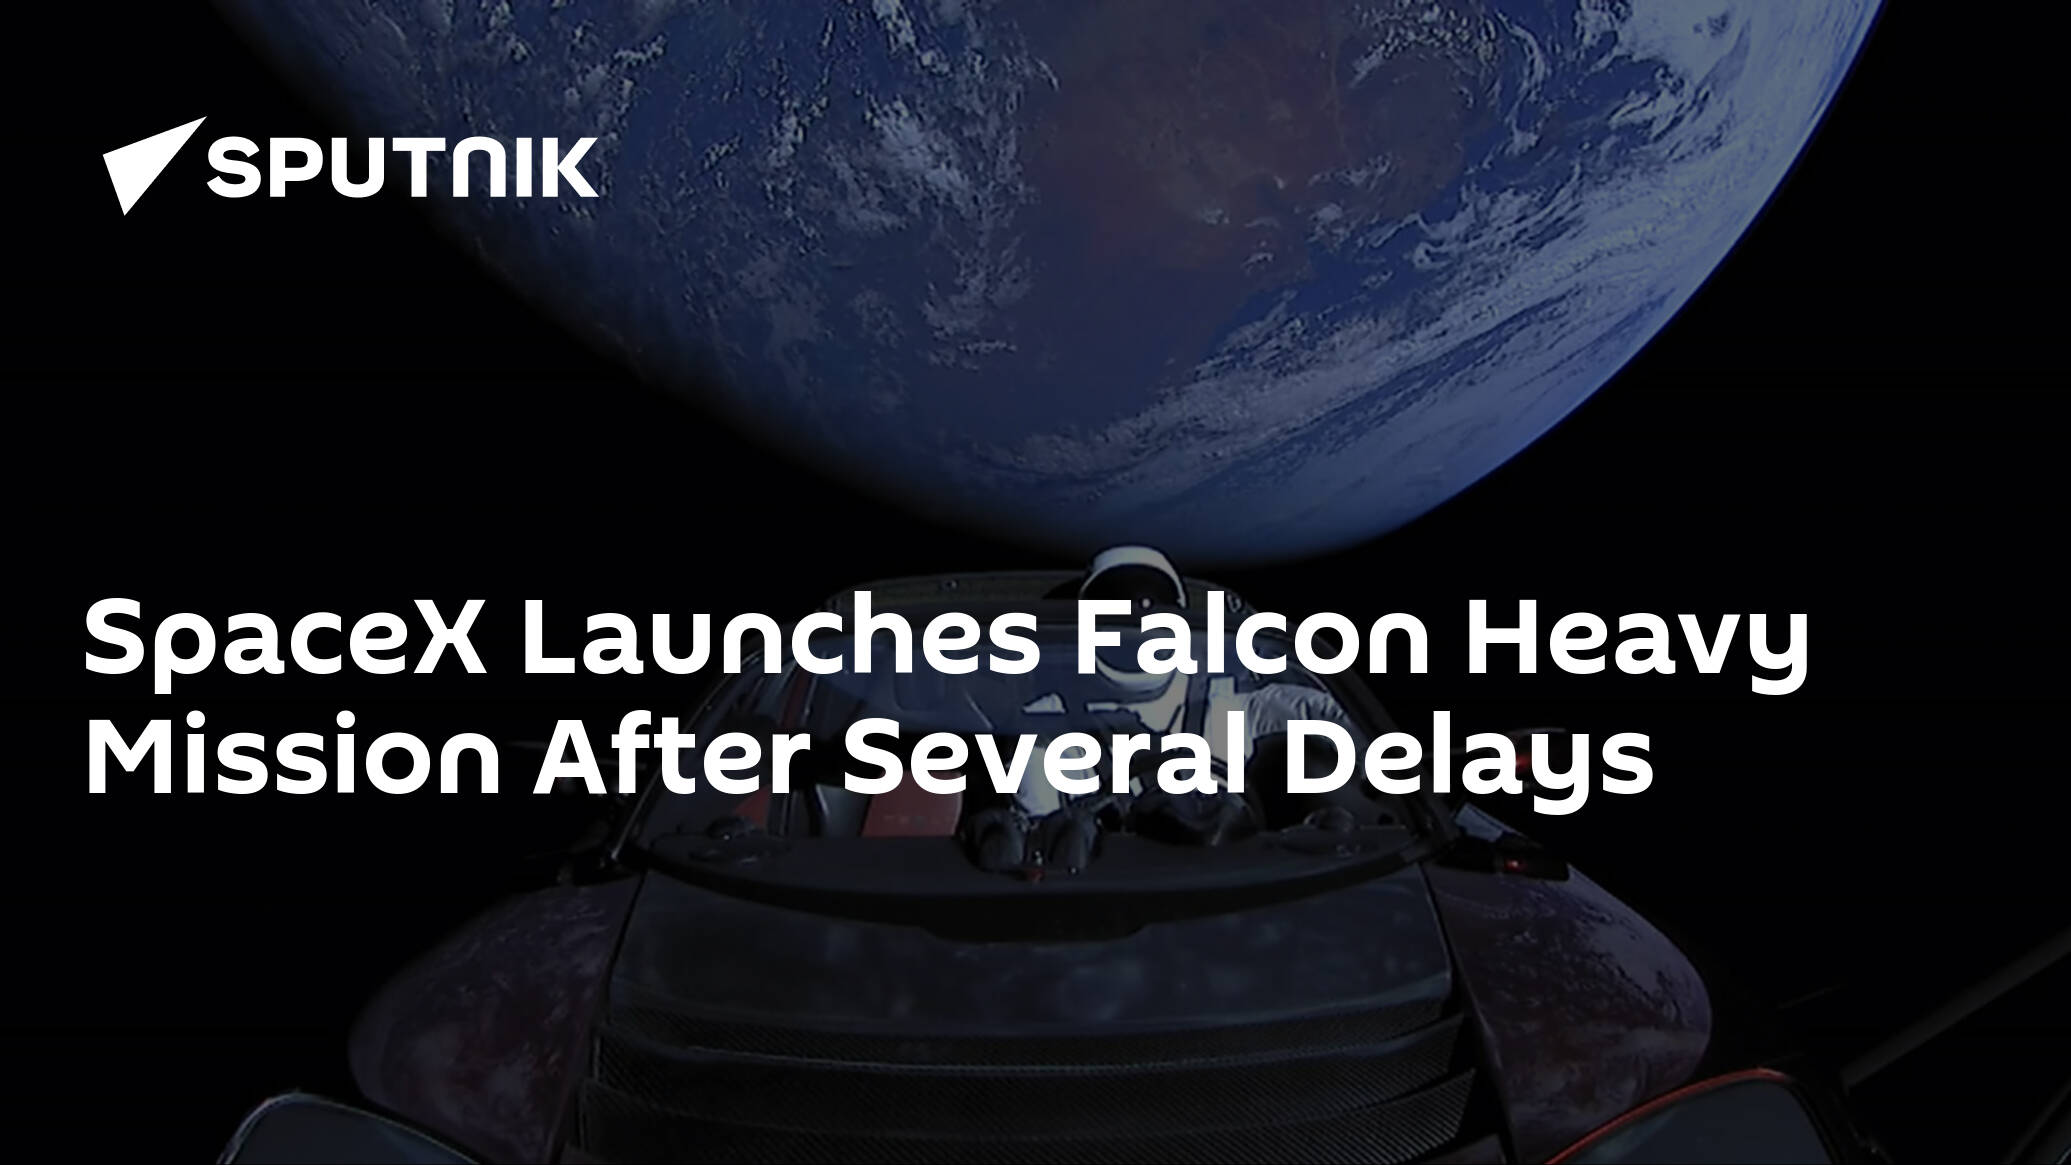 SpaceX Launches Falcon Heavy Mission After Several Delays